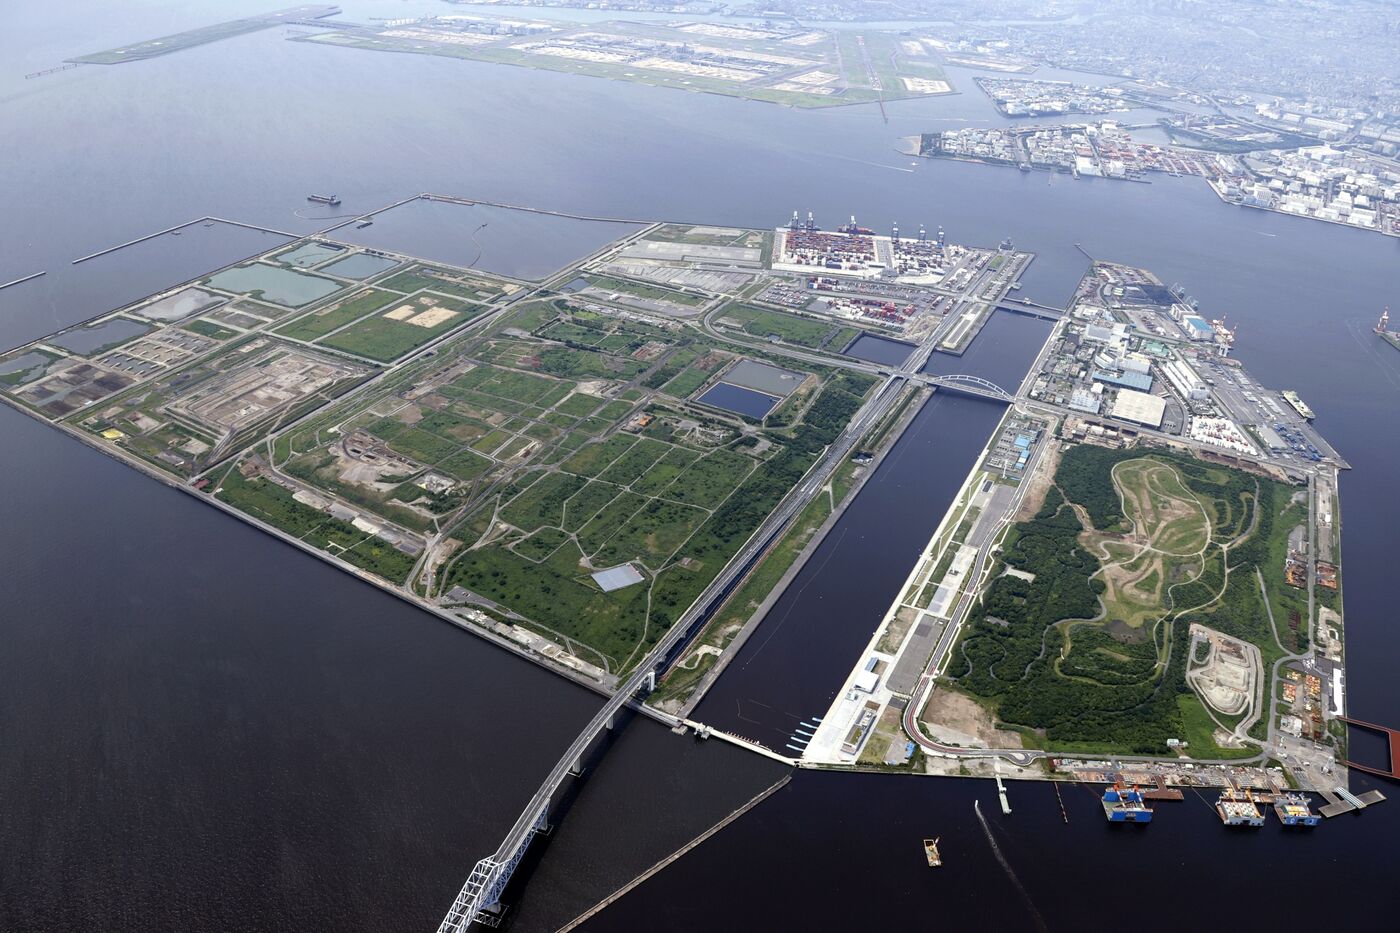 relates to Tokyo Wants to Build a Mini-City in its Bay